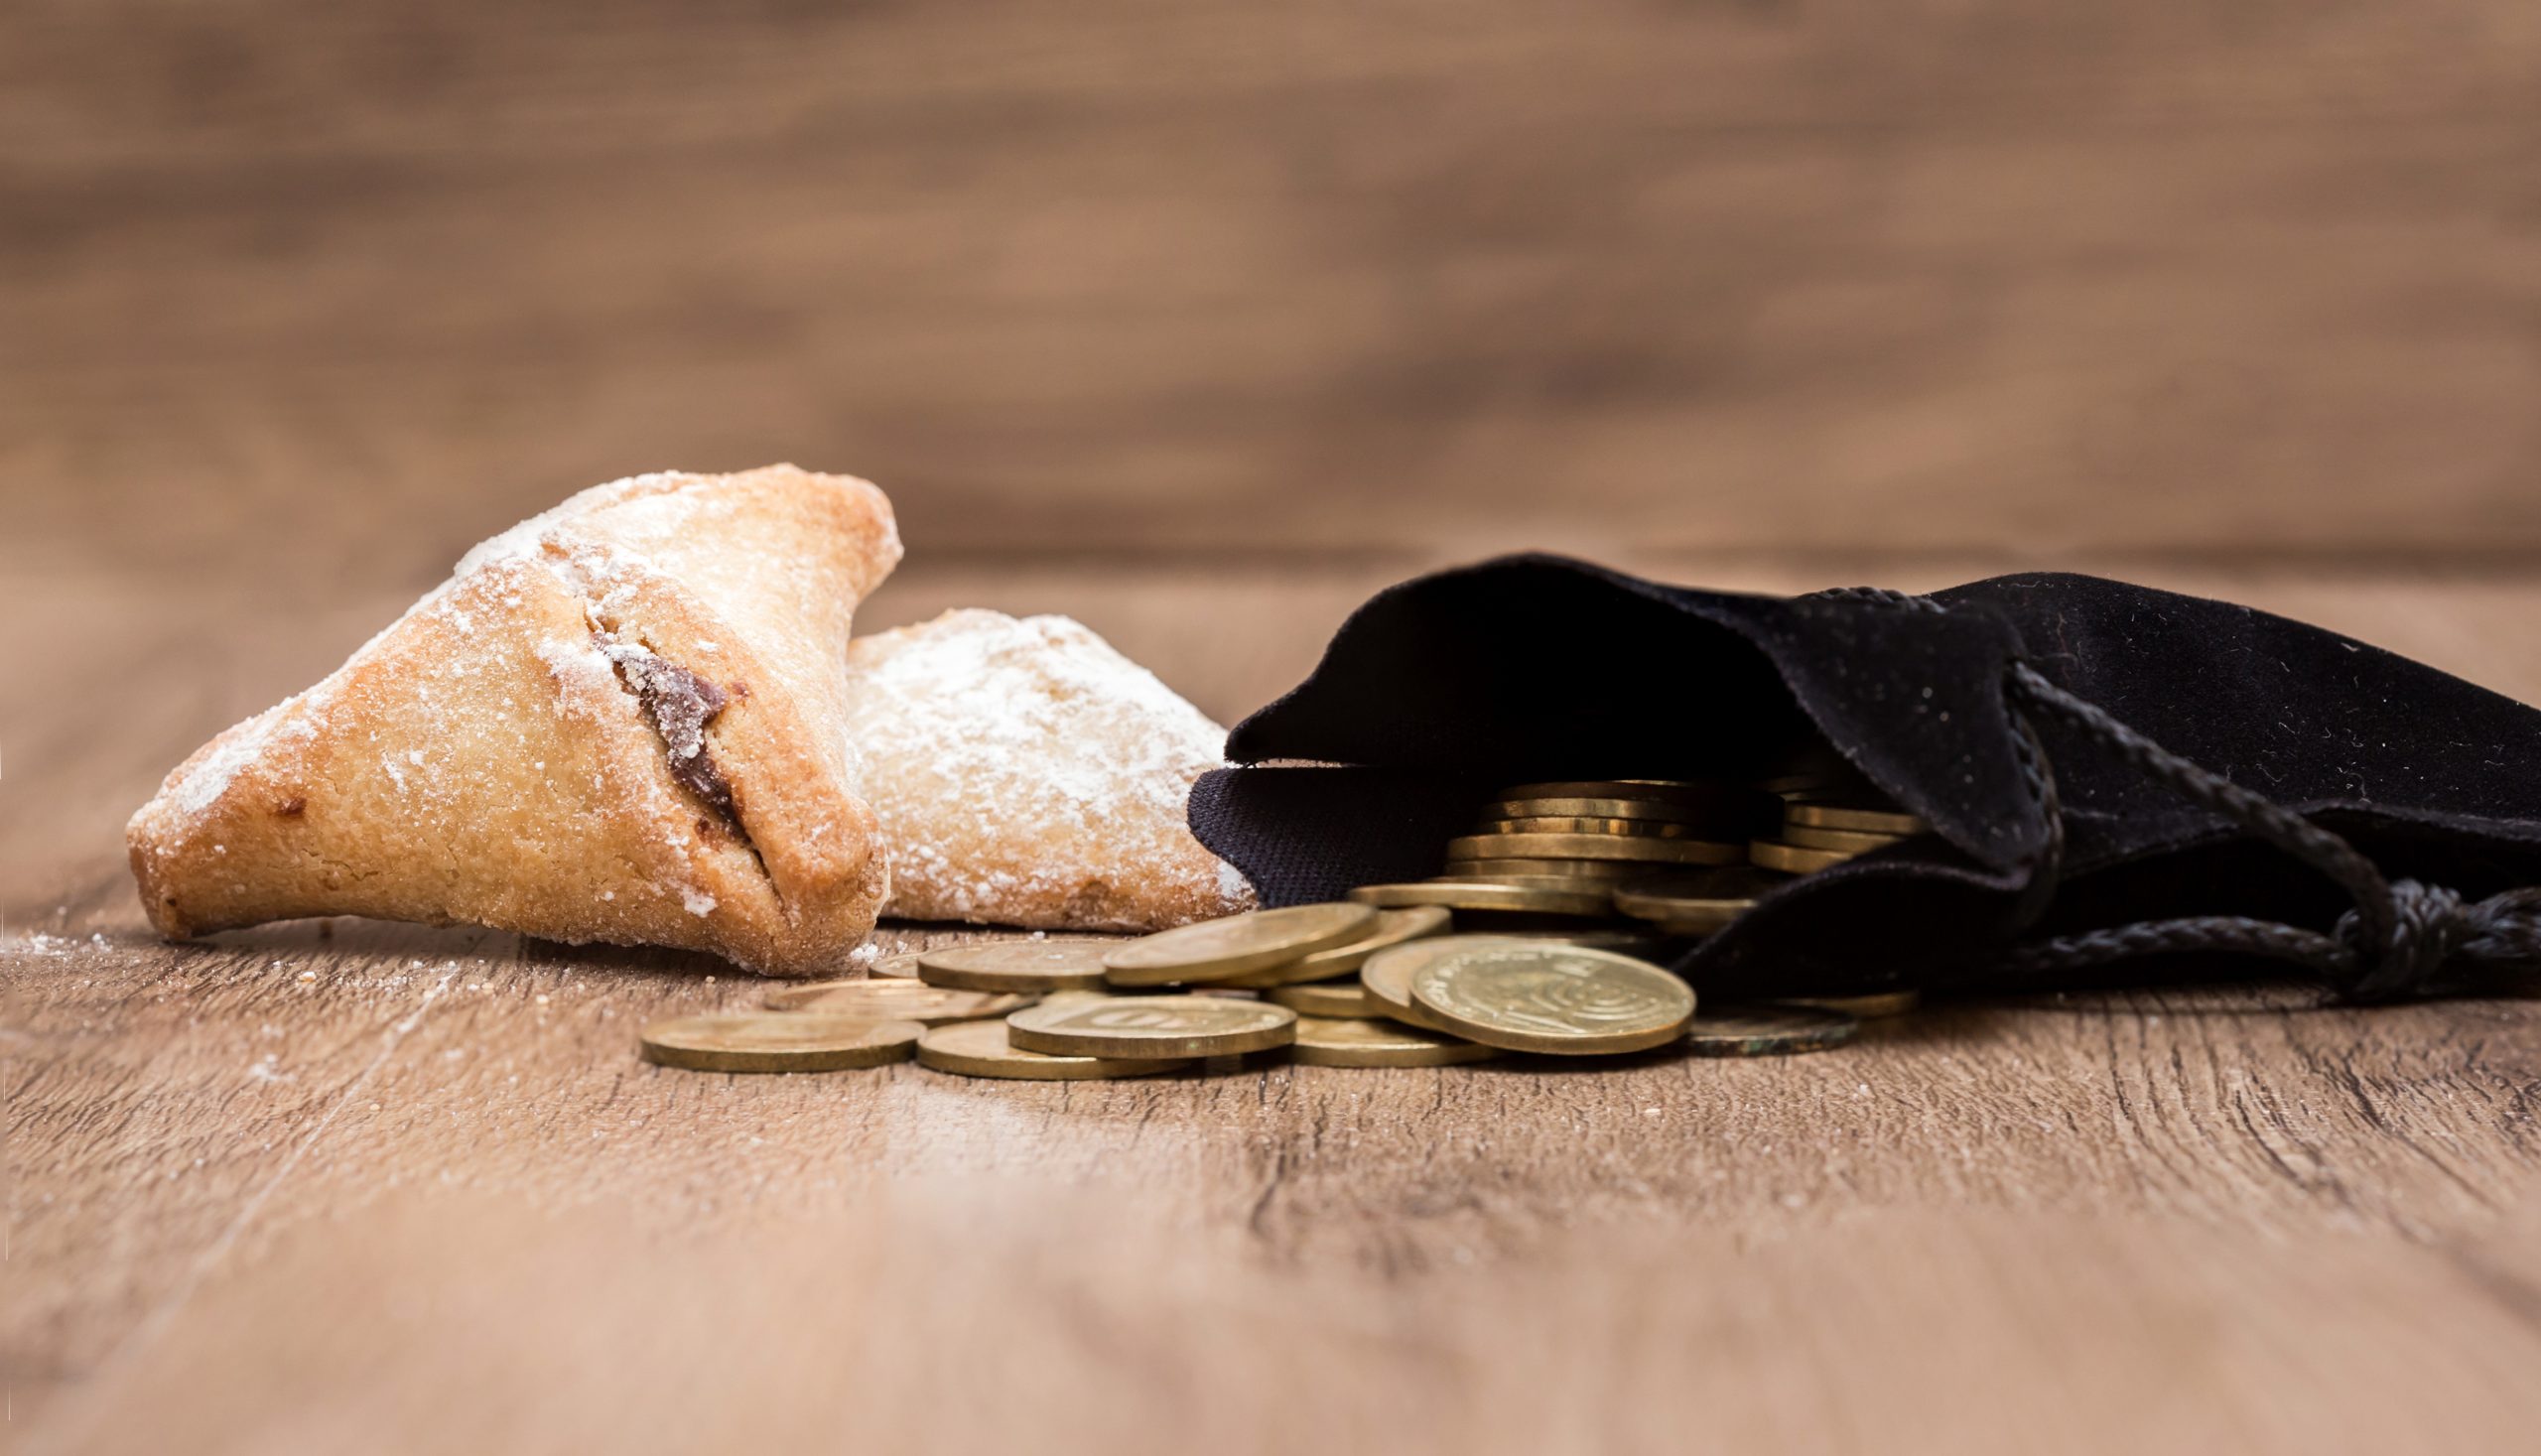 Purim holiday cookies, "Ozne Haman" in Hebrew. Haman's ears. With a bag of gold coins. Money for Purim | Foto: © Adobe Stock